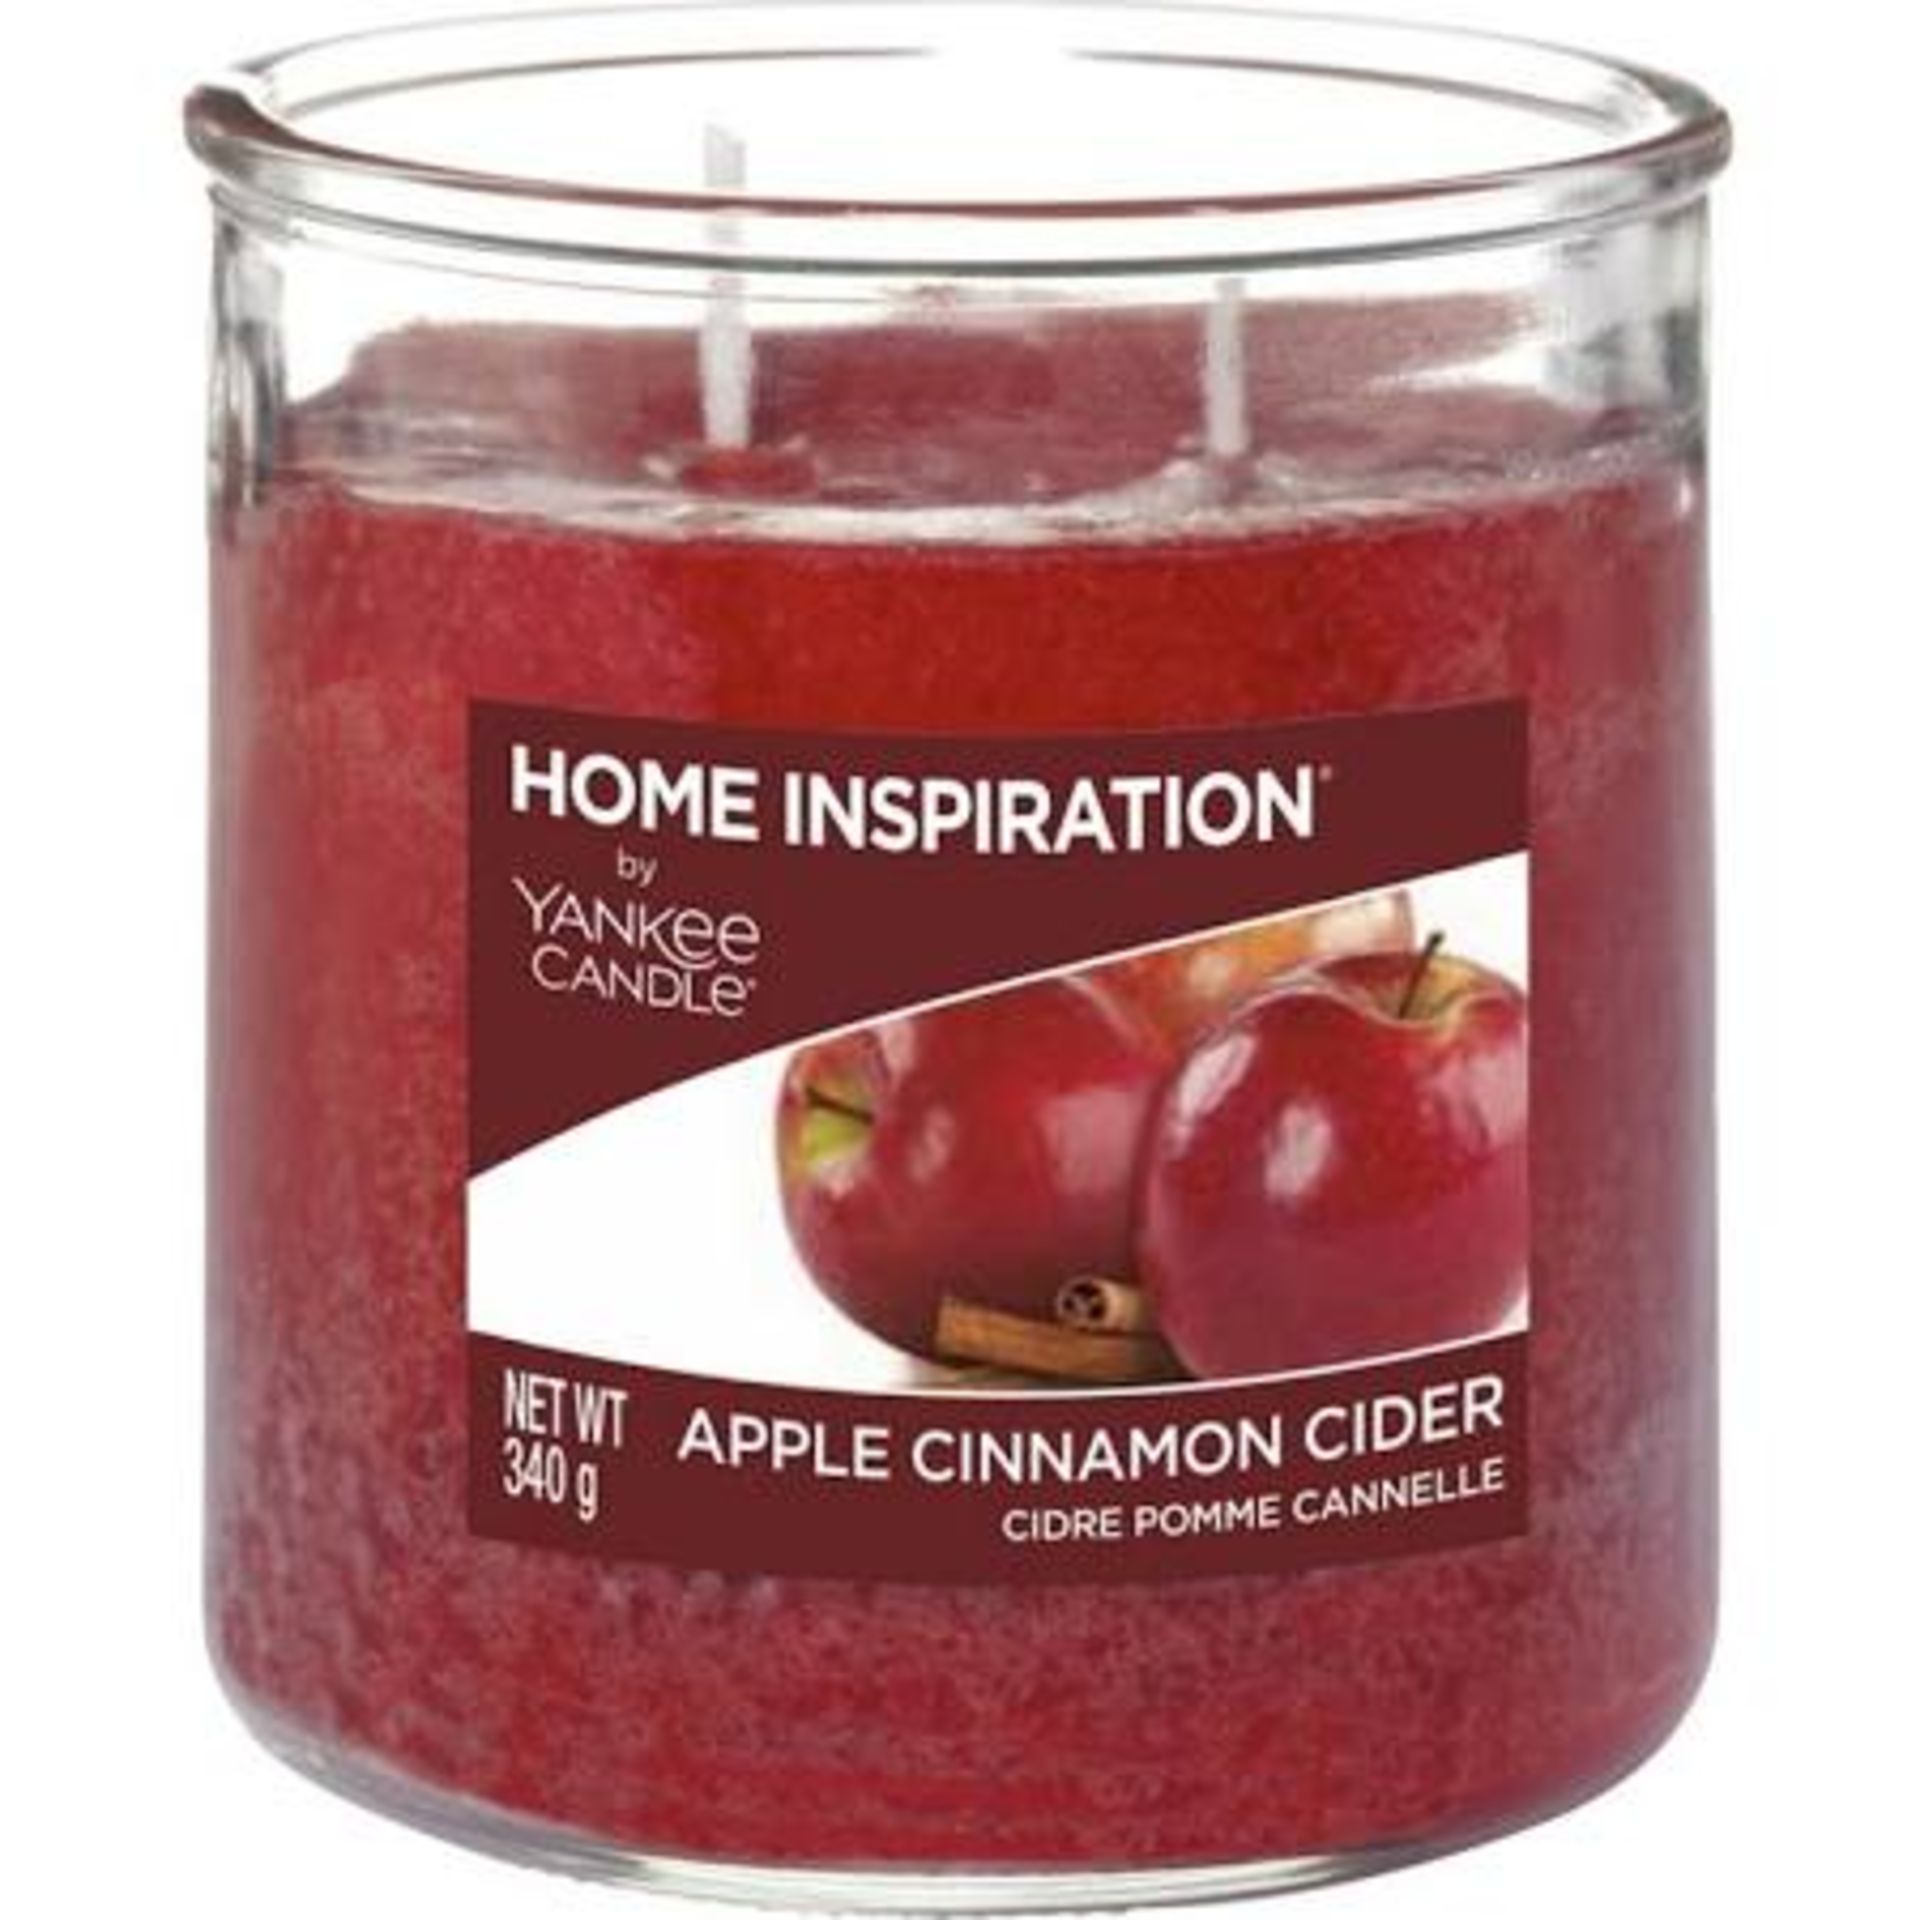 V *TRADE QTY* Brand New Home Inspiration by Yankee Candle Apple Cinnamon Cider 198g Tumbler Candle -